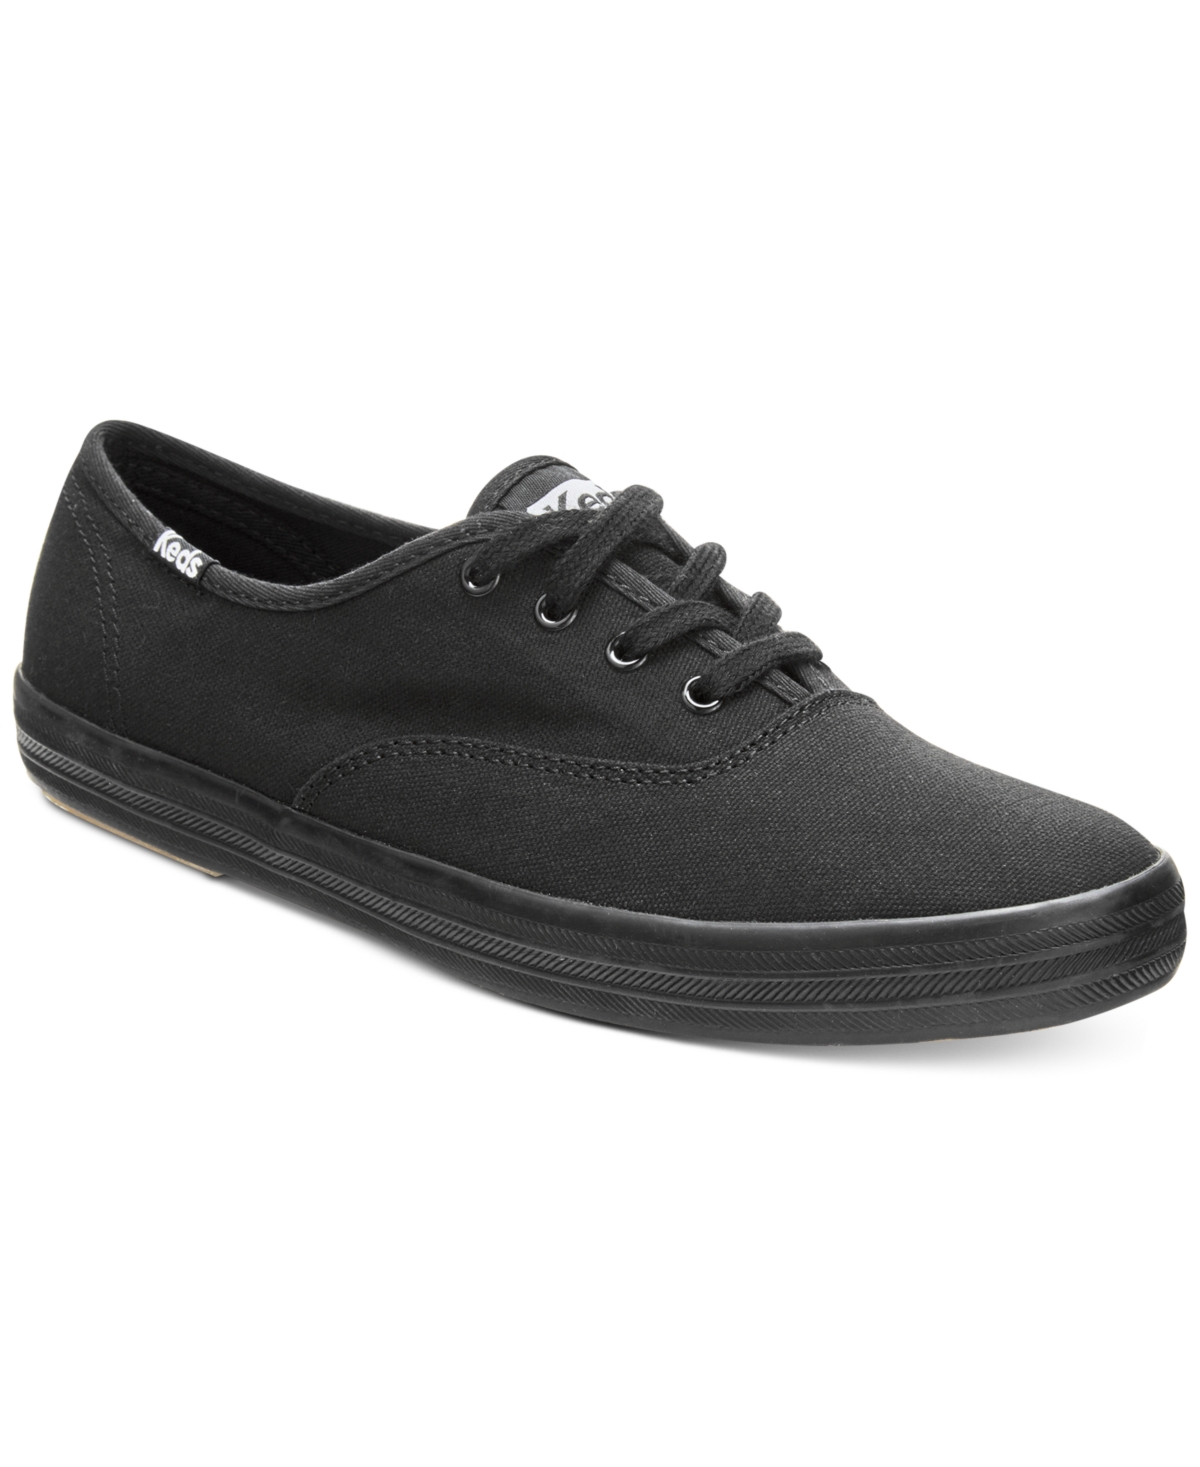 UPC 044208122751 product image for Keds Women's Champion Ortholite Lace-Up Oxford Fashion Sneakers from Finish Line | upcitemdb.com